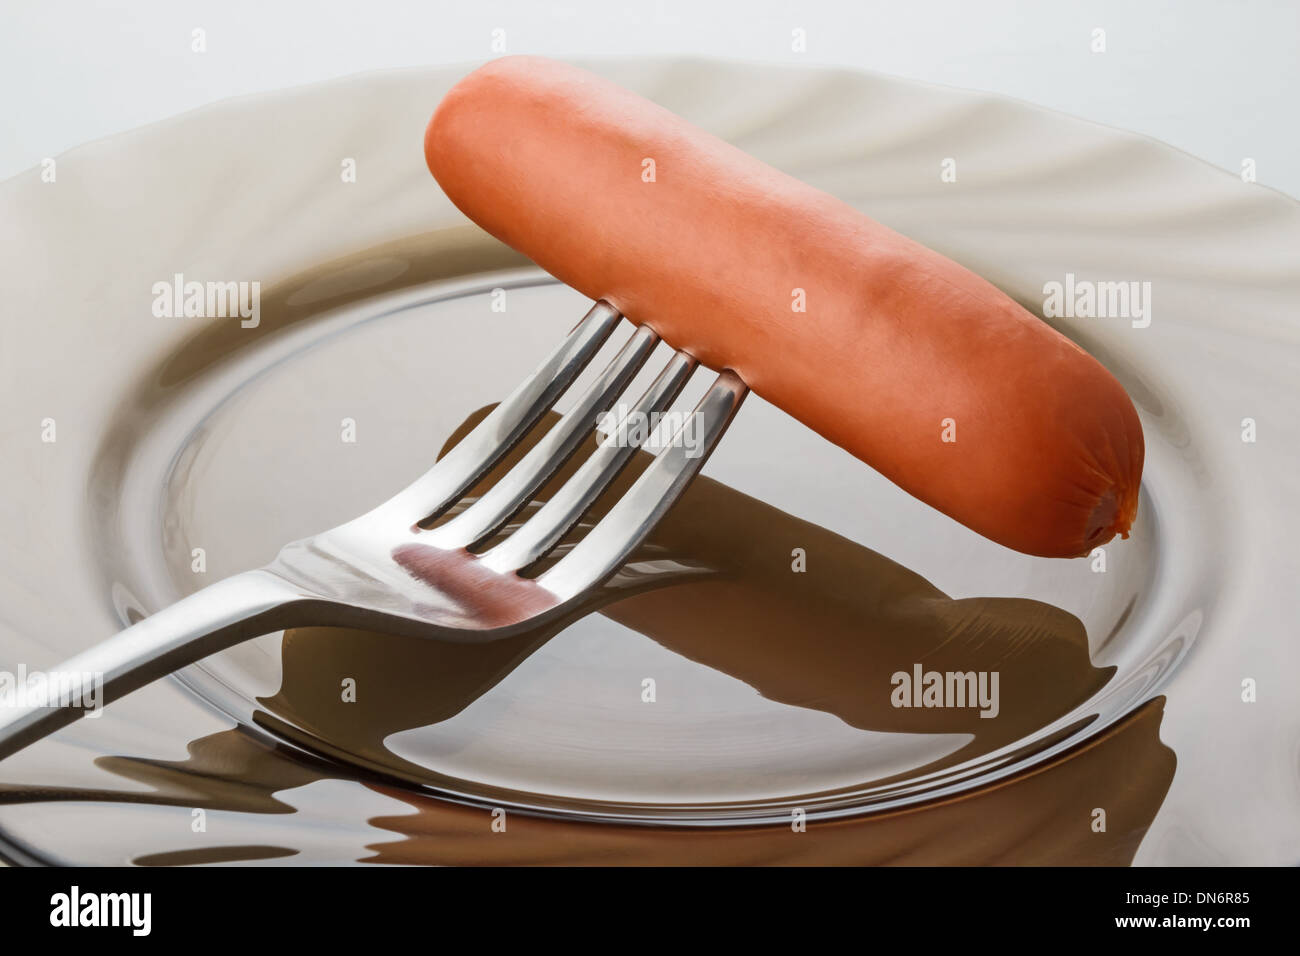 a freshly cooked sausage on a fork Stock Photo